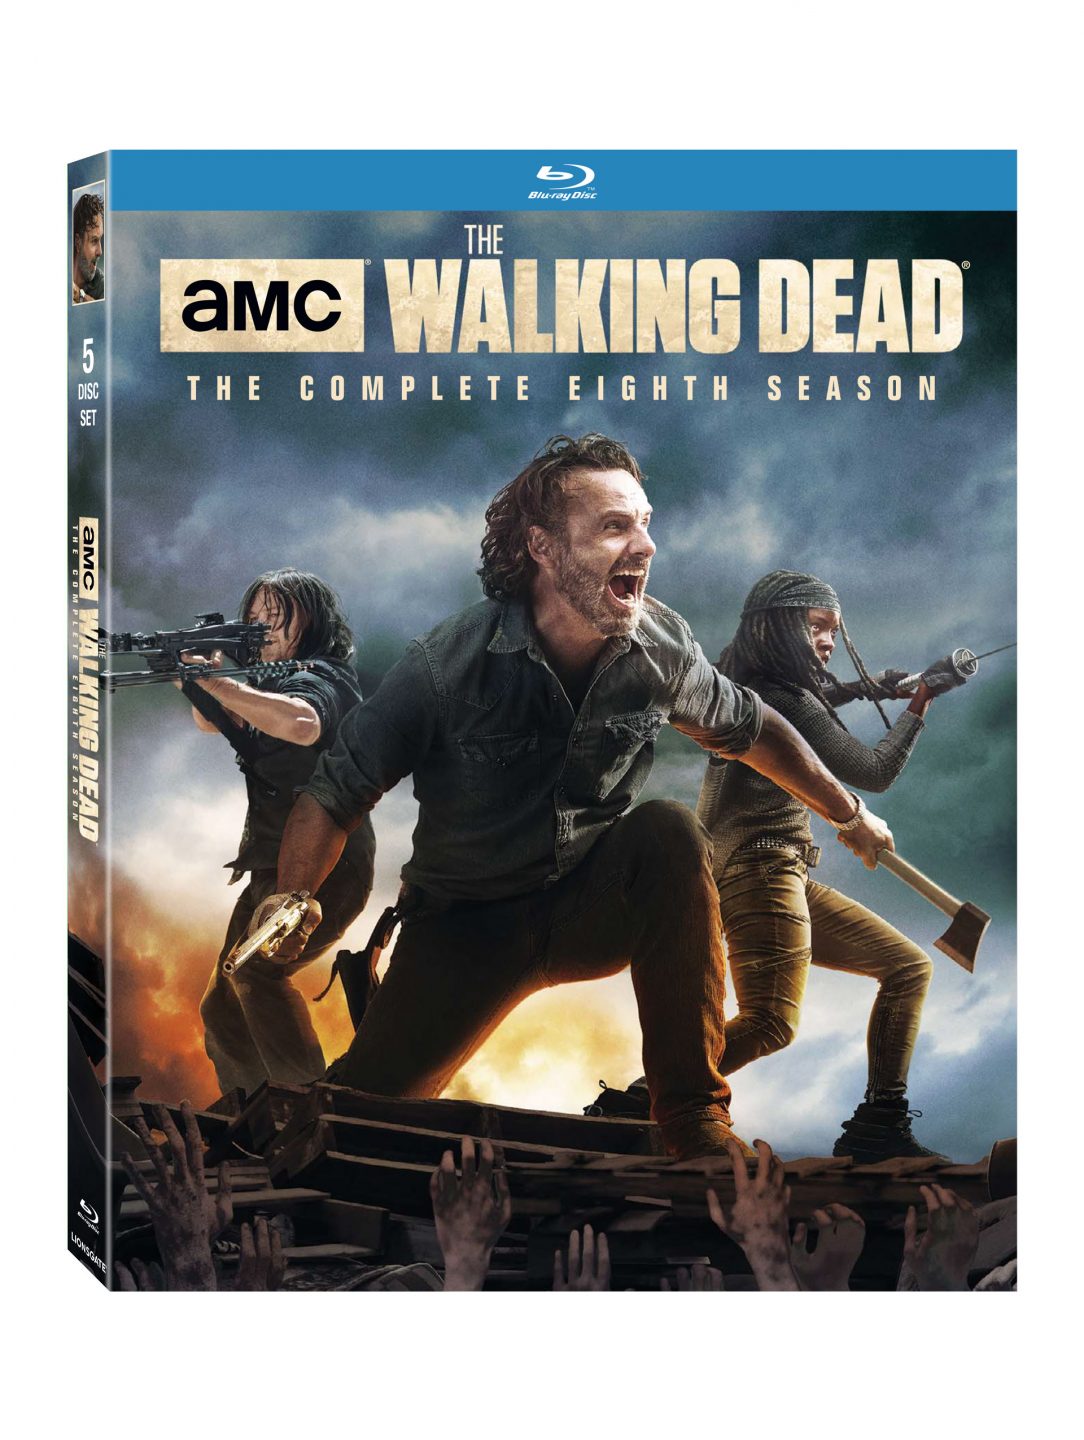 The Walking Dead Season 8 Blu-Ray Combo Pack cover (Lionsgate Home Entertainment)